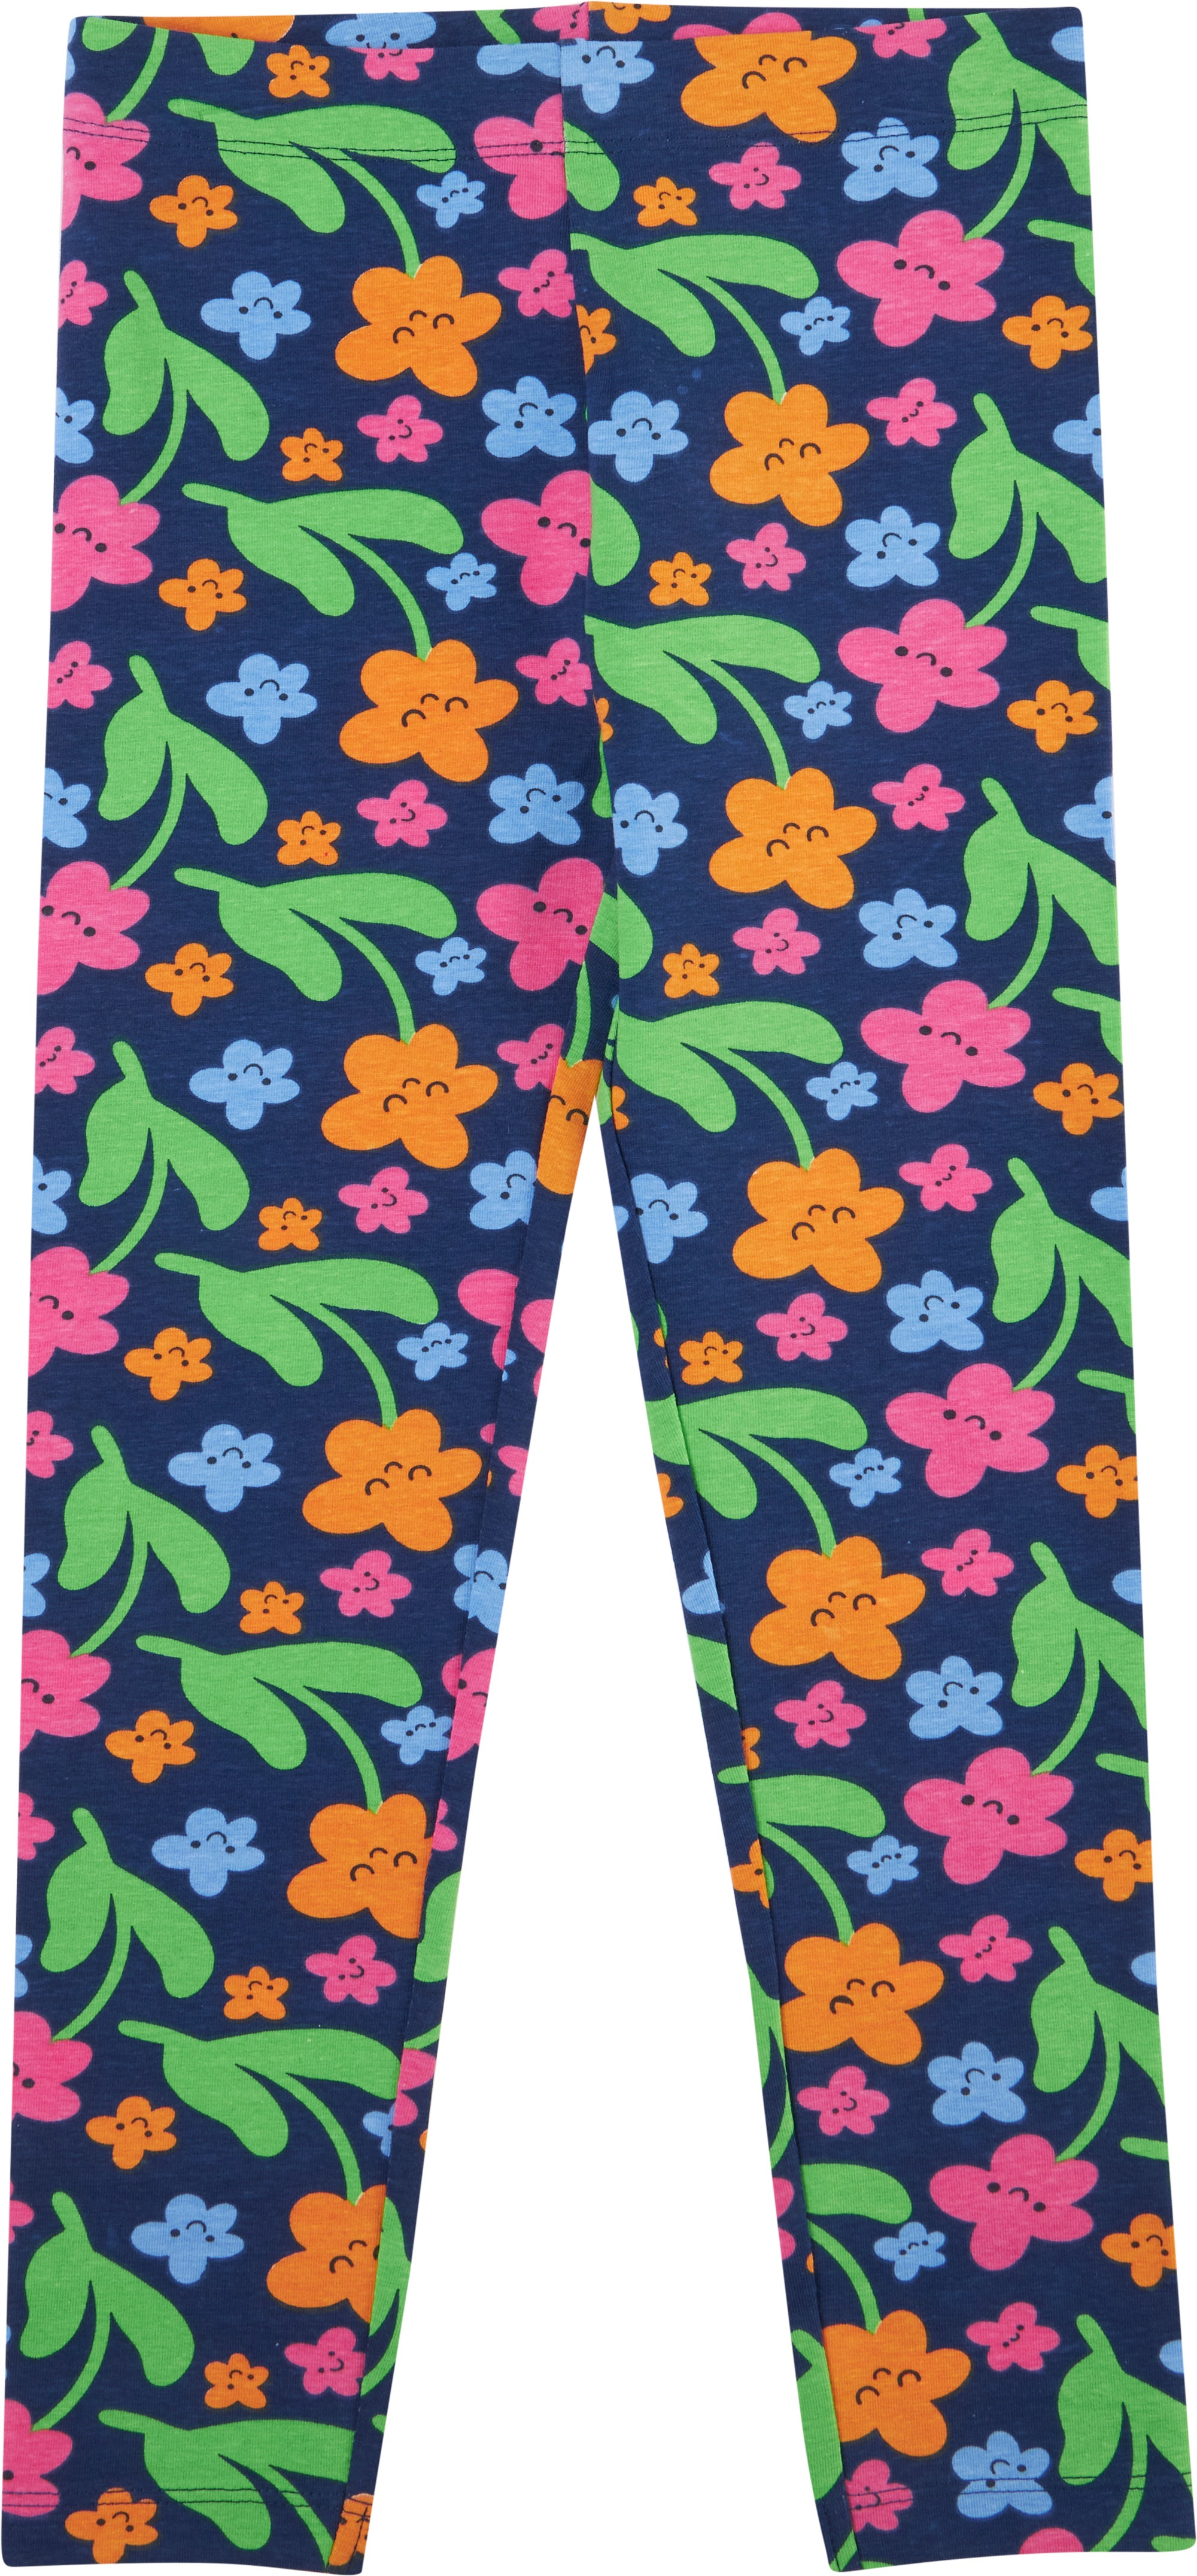 Simpleng Buhay by MG - Floral Print Soft Teenager Leggings ₱132.00  Available here:  Details: Design----Colorful, Fun,  Cute, and Stylish Patterns. Great For Working Out or Everyday Wear.  Wash----Machine Wash,easy to wash,No